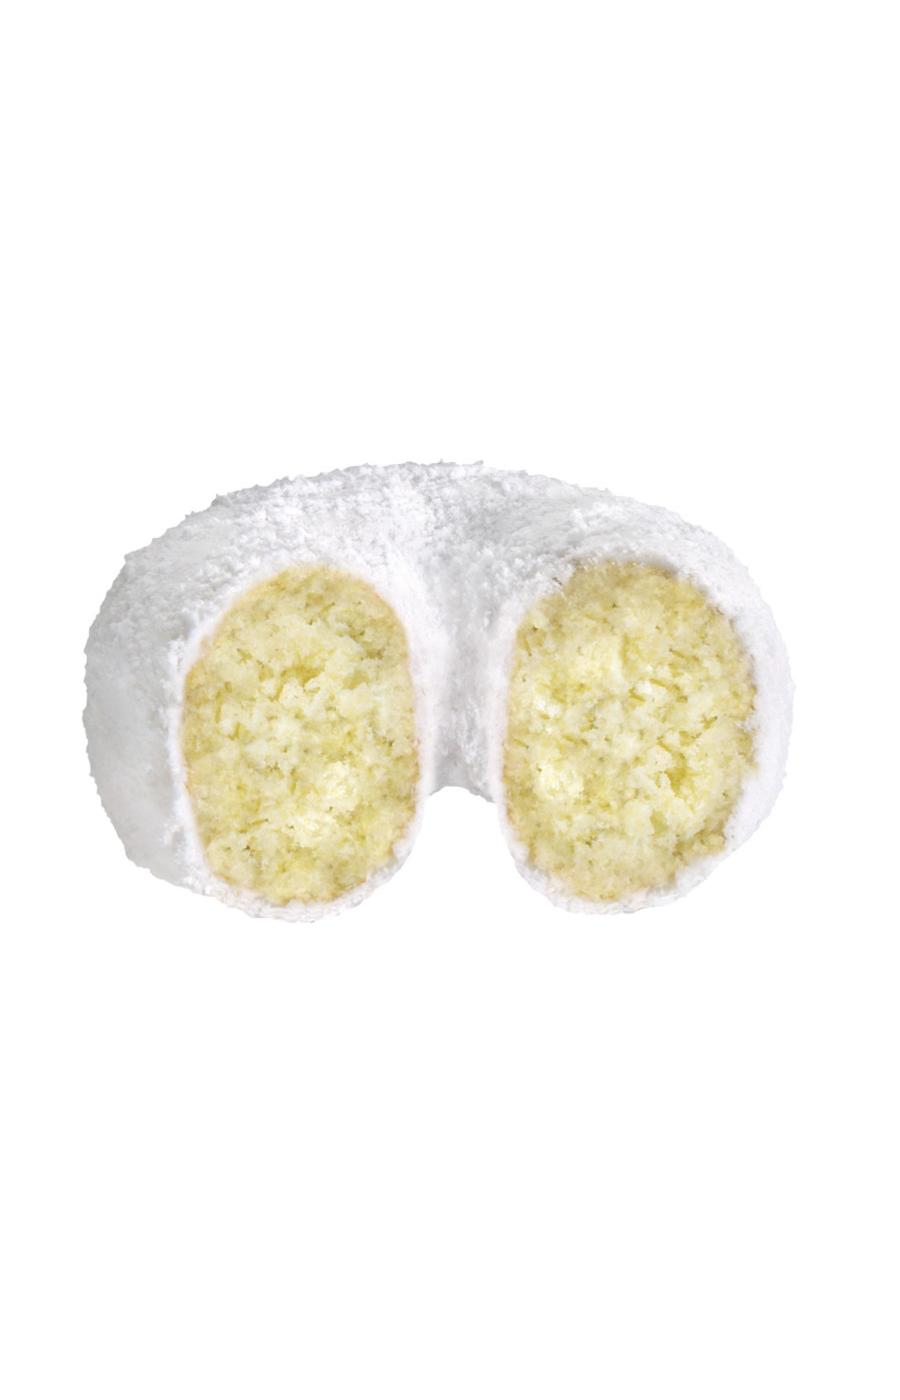 Hostess Donettes Powdered Mini Donuts; image 3 of 6